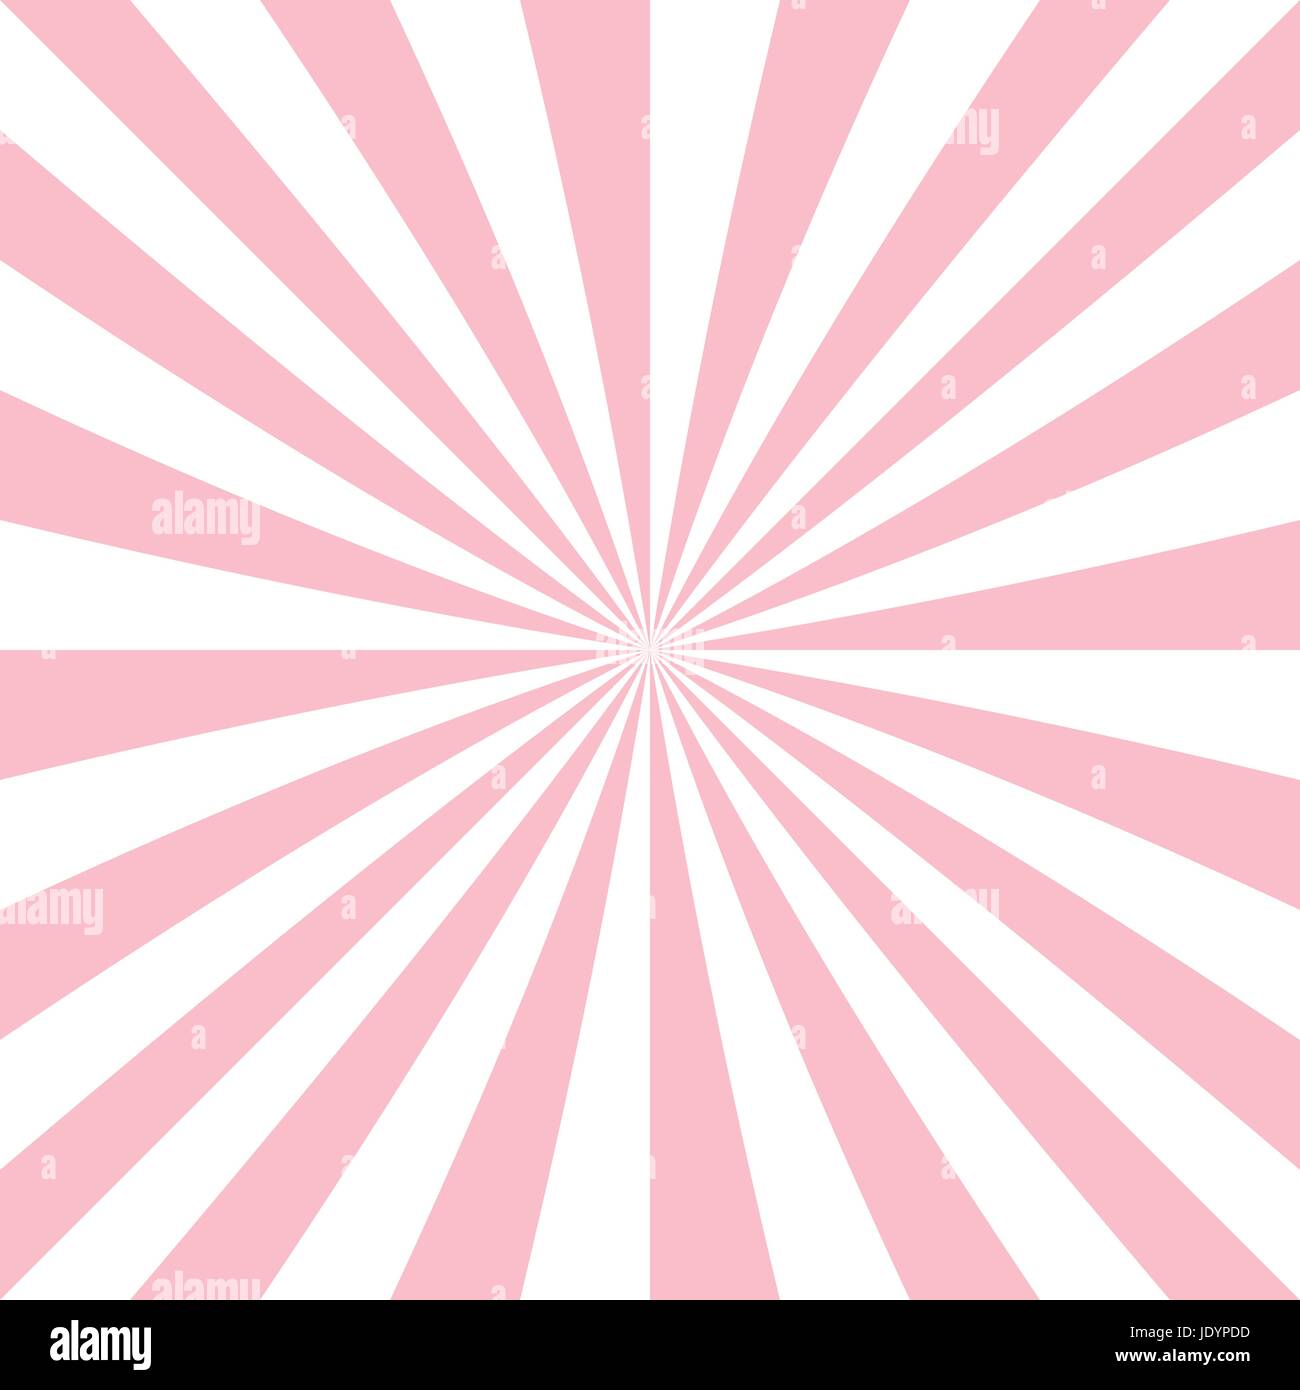 Abstract starburst background from radial stripes Stock Vector